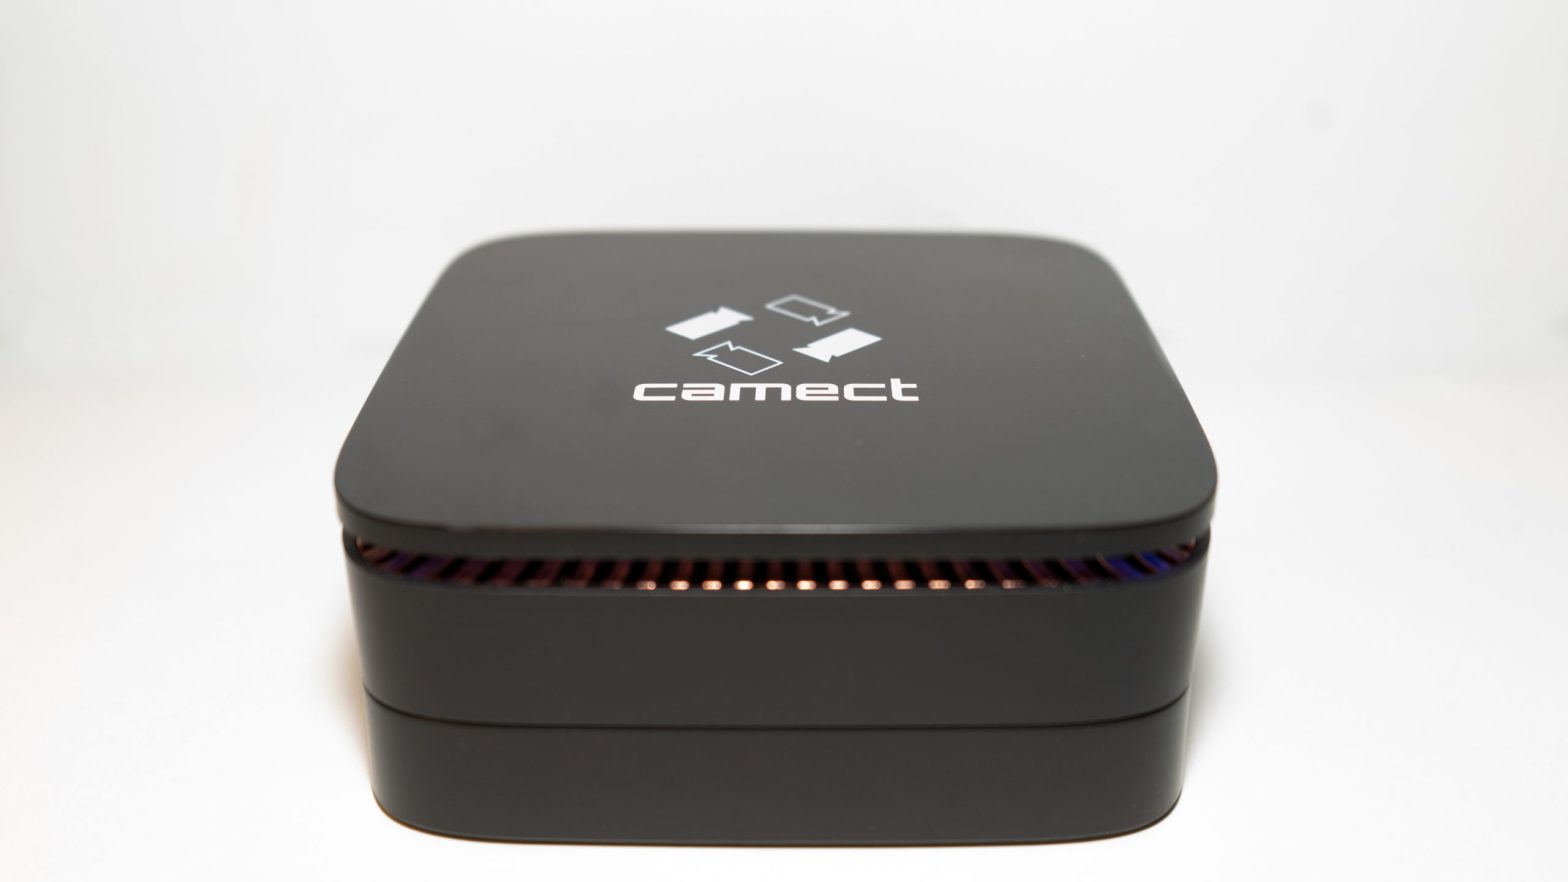 camect CAAK14LTD Home smart video recorder User Guide